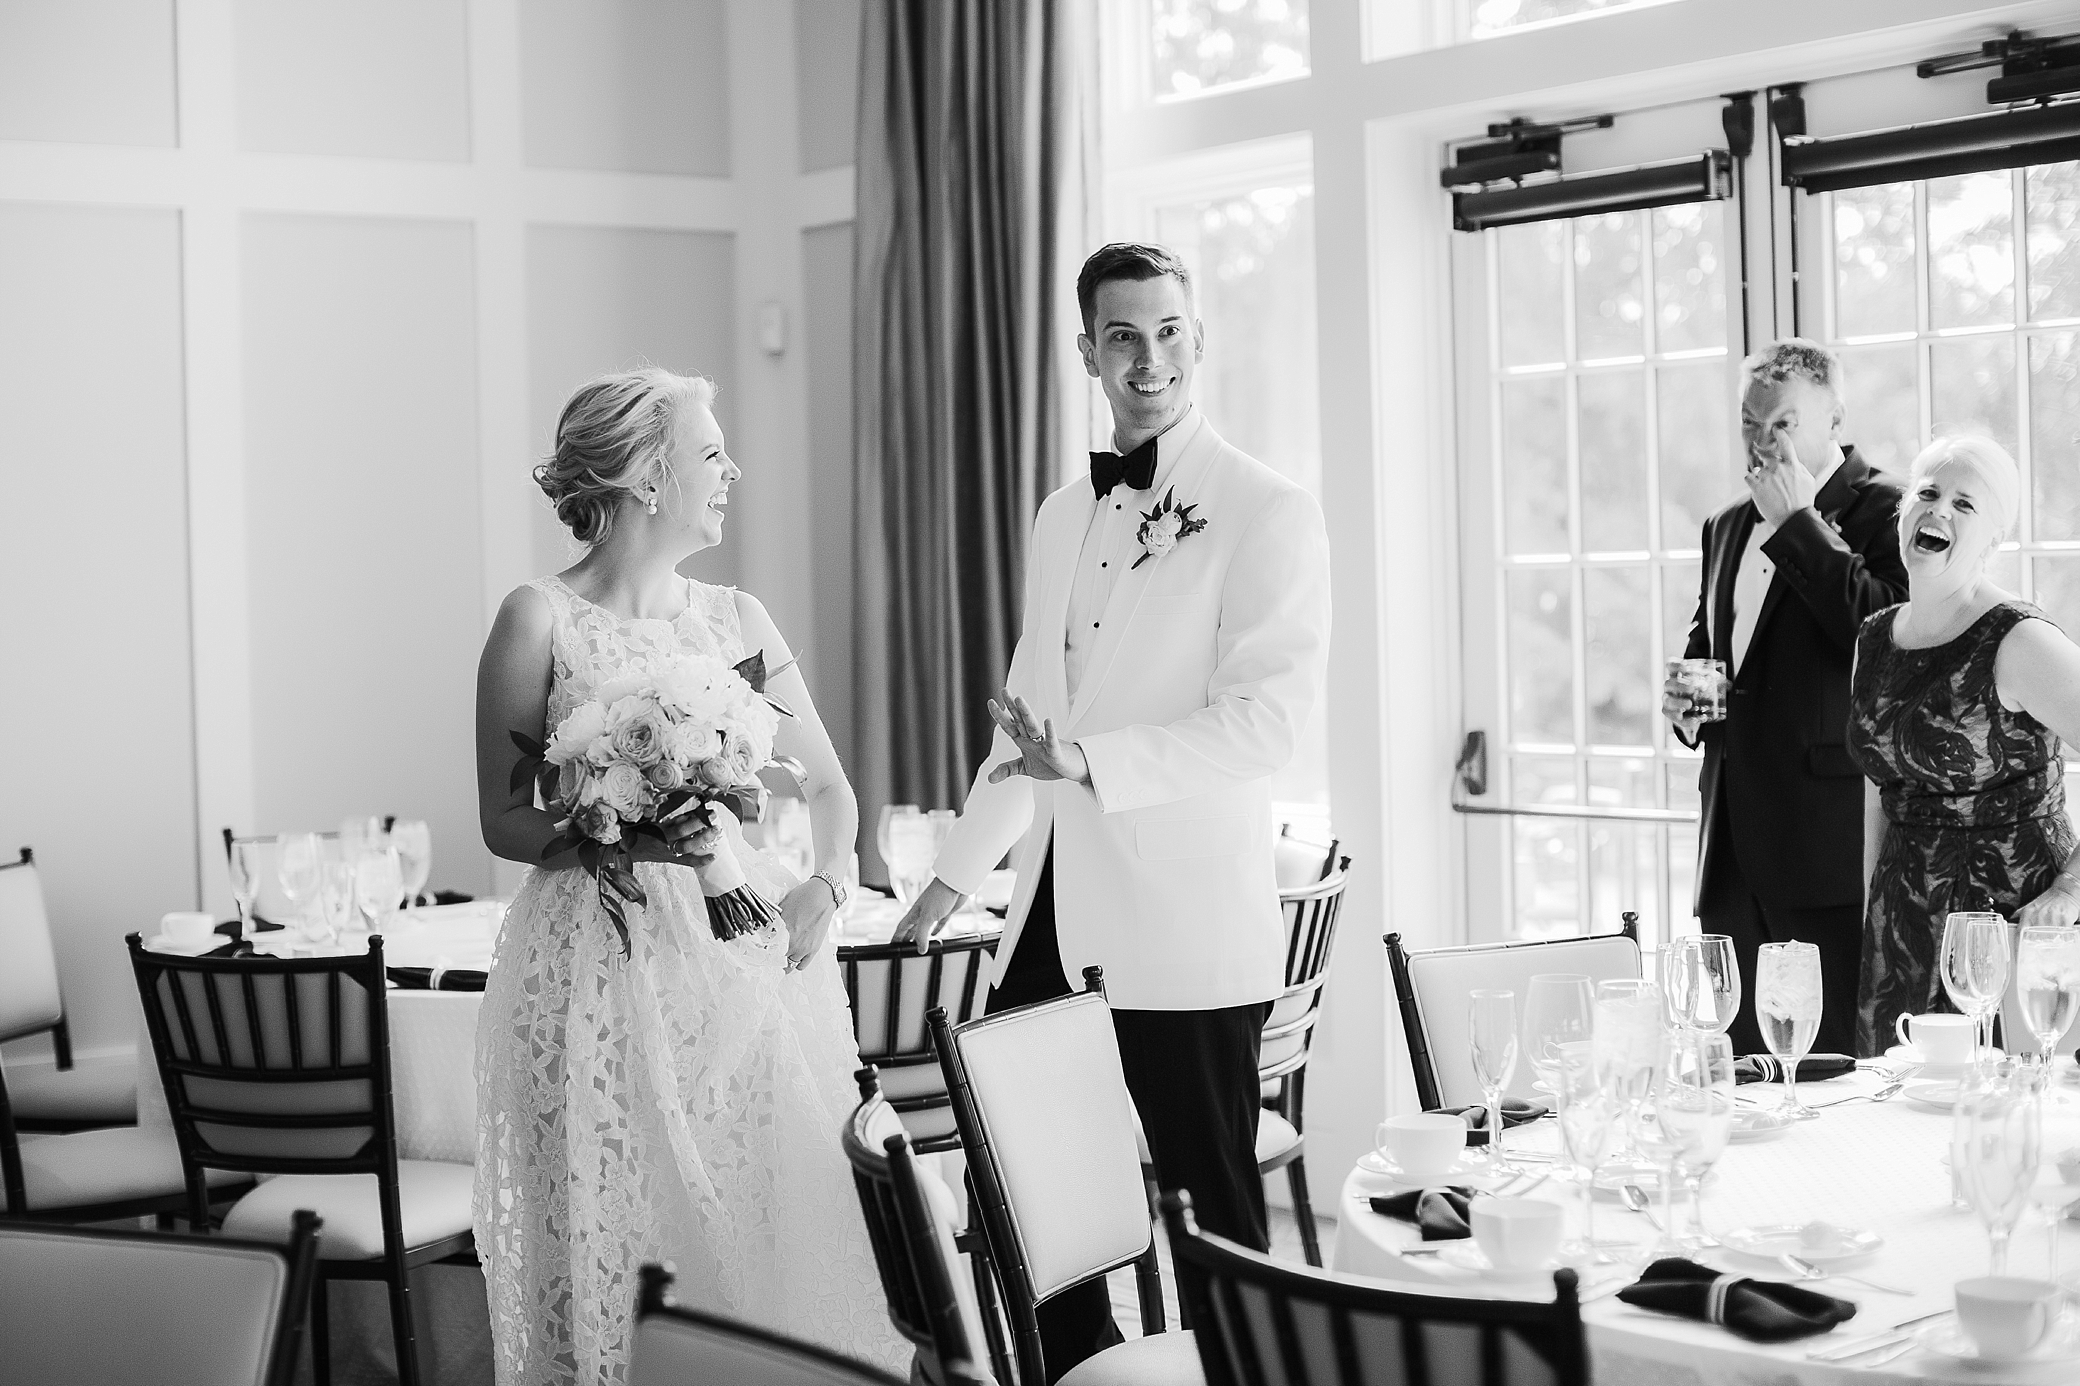 Reception viewing for Bride and Groom on their wedding day | Must Have Moments on Your Wedding Day